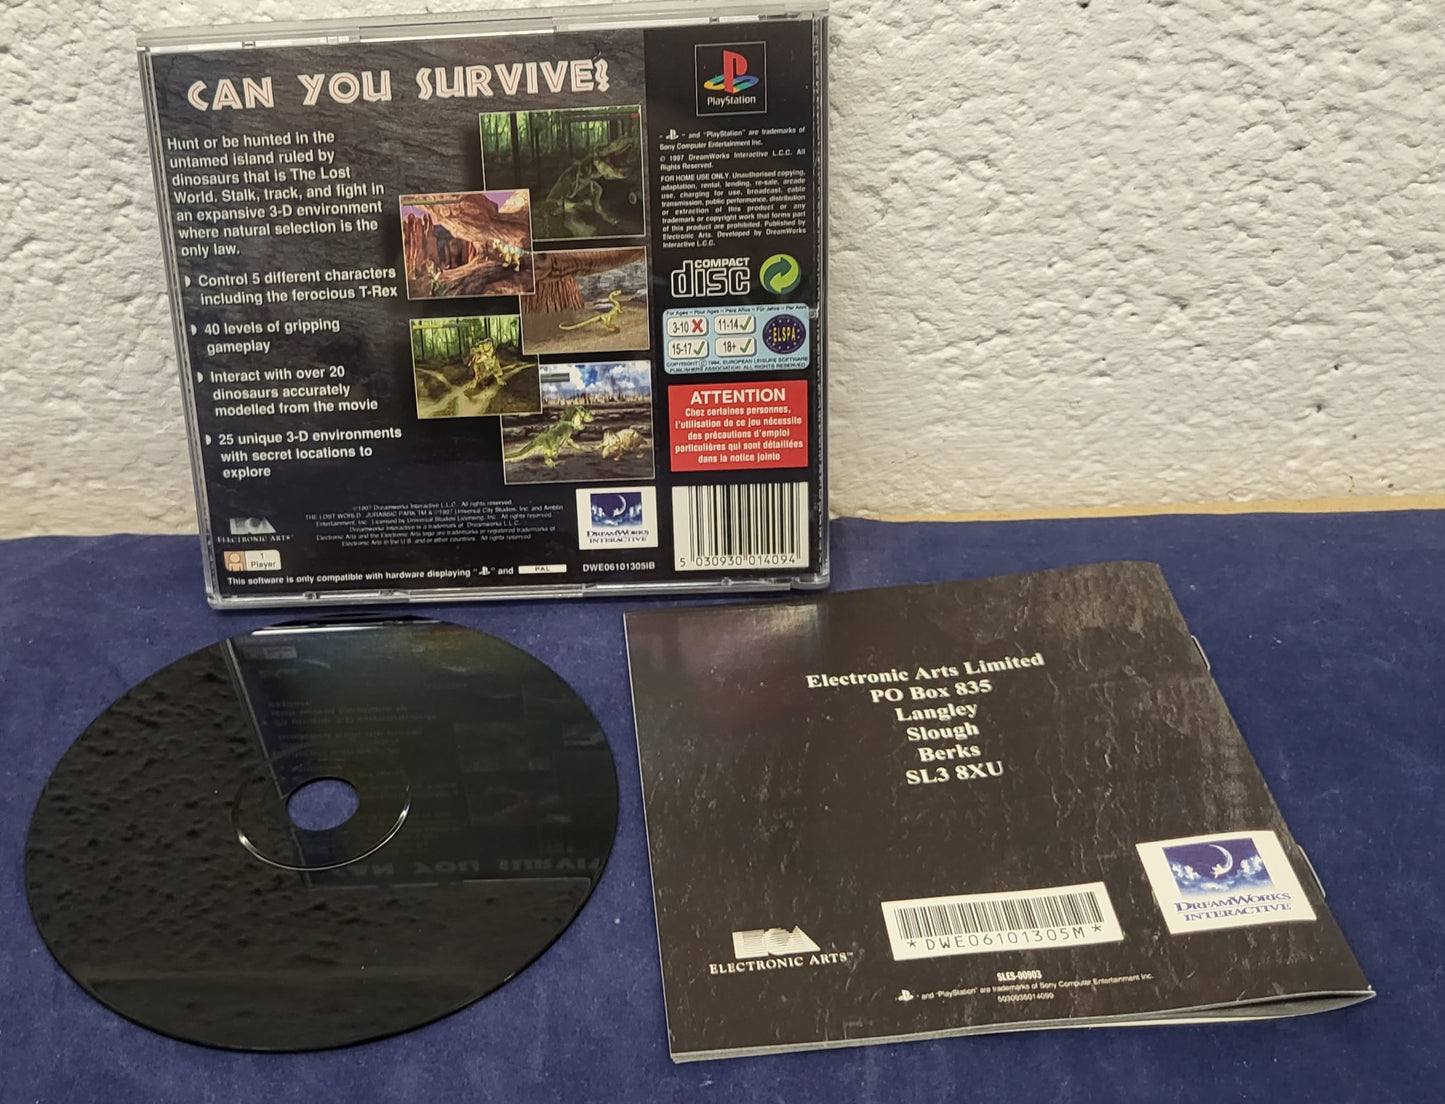 The Lost World Jurassic Park Black Label Sony Playstation 1 (PS1) Game